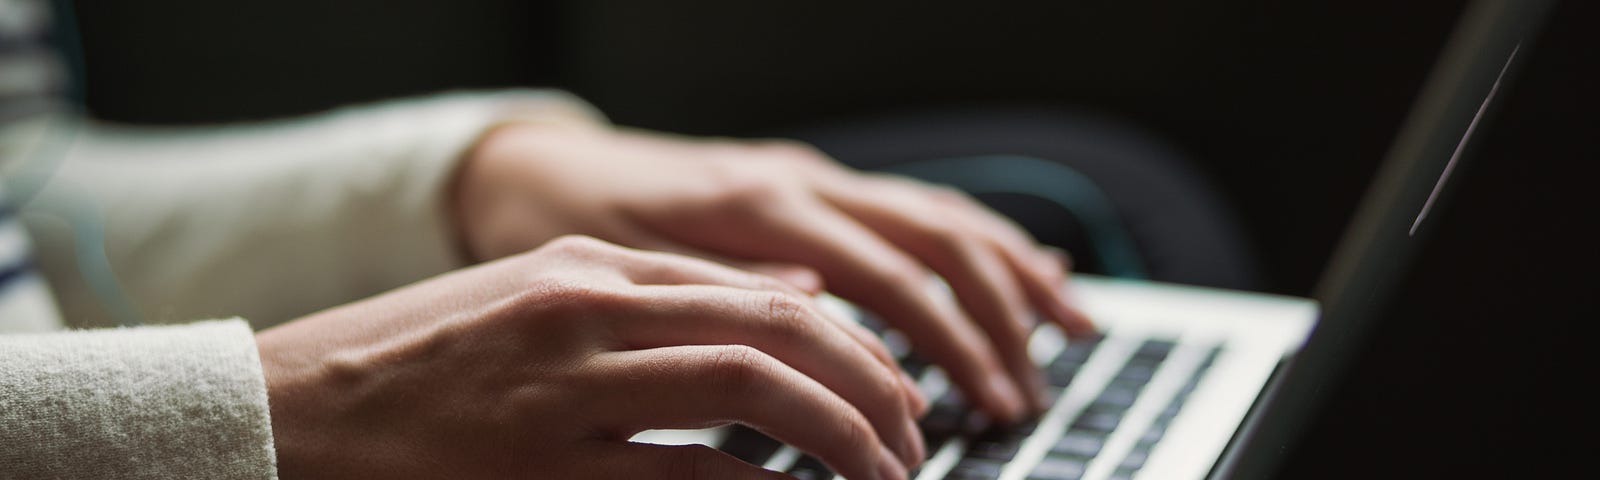 A close up of a pair of hands typing on a laptop keyboard.